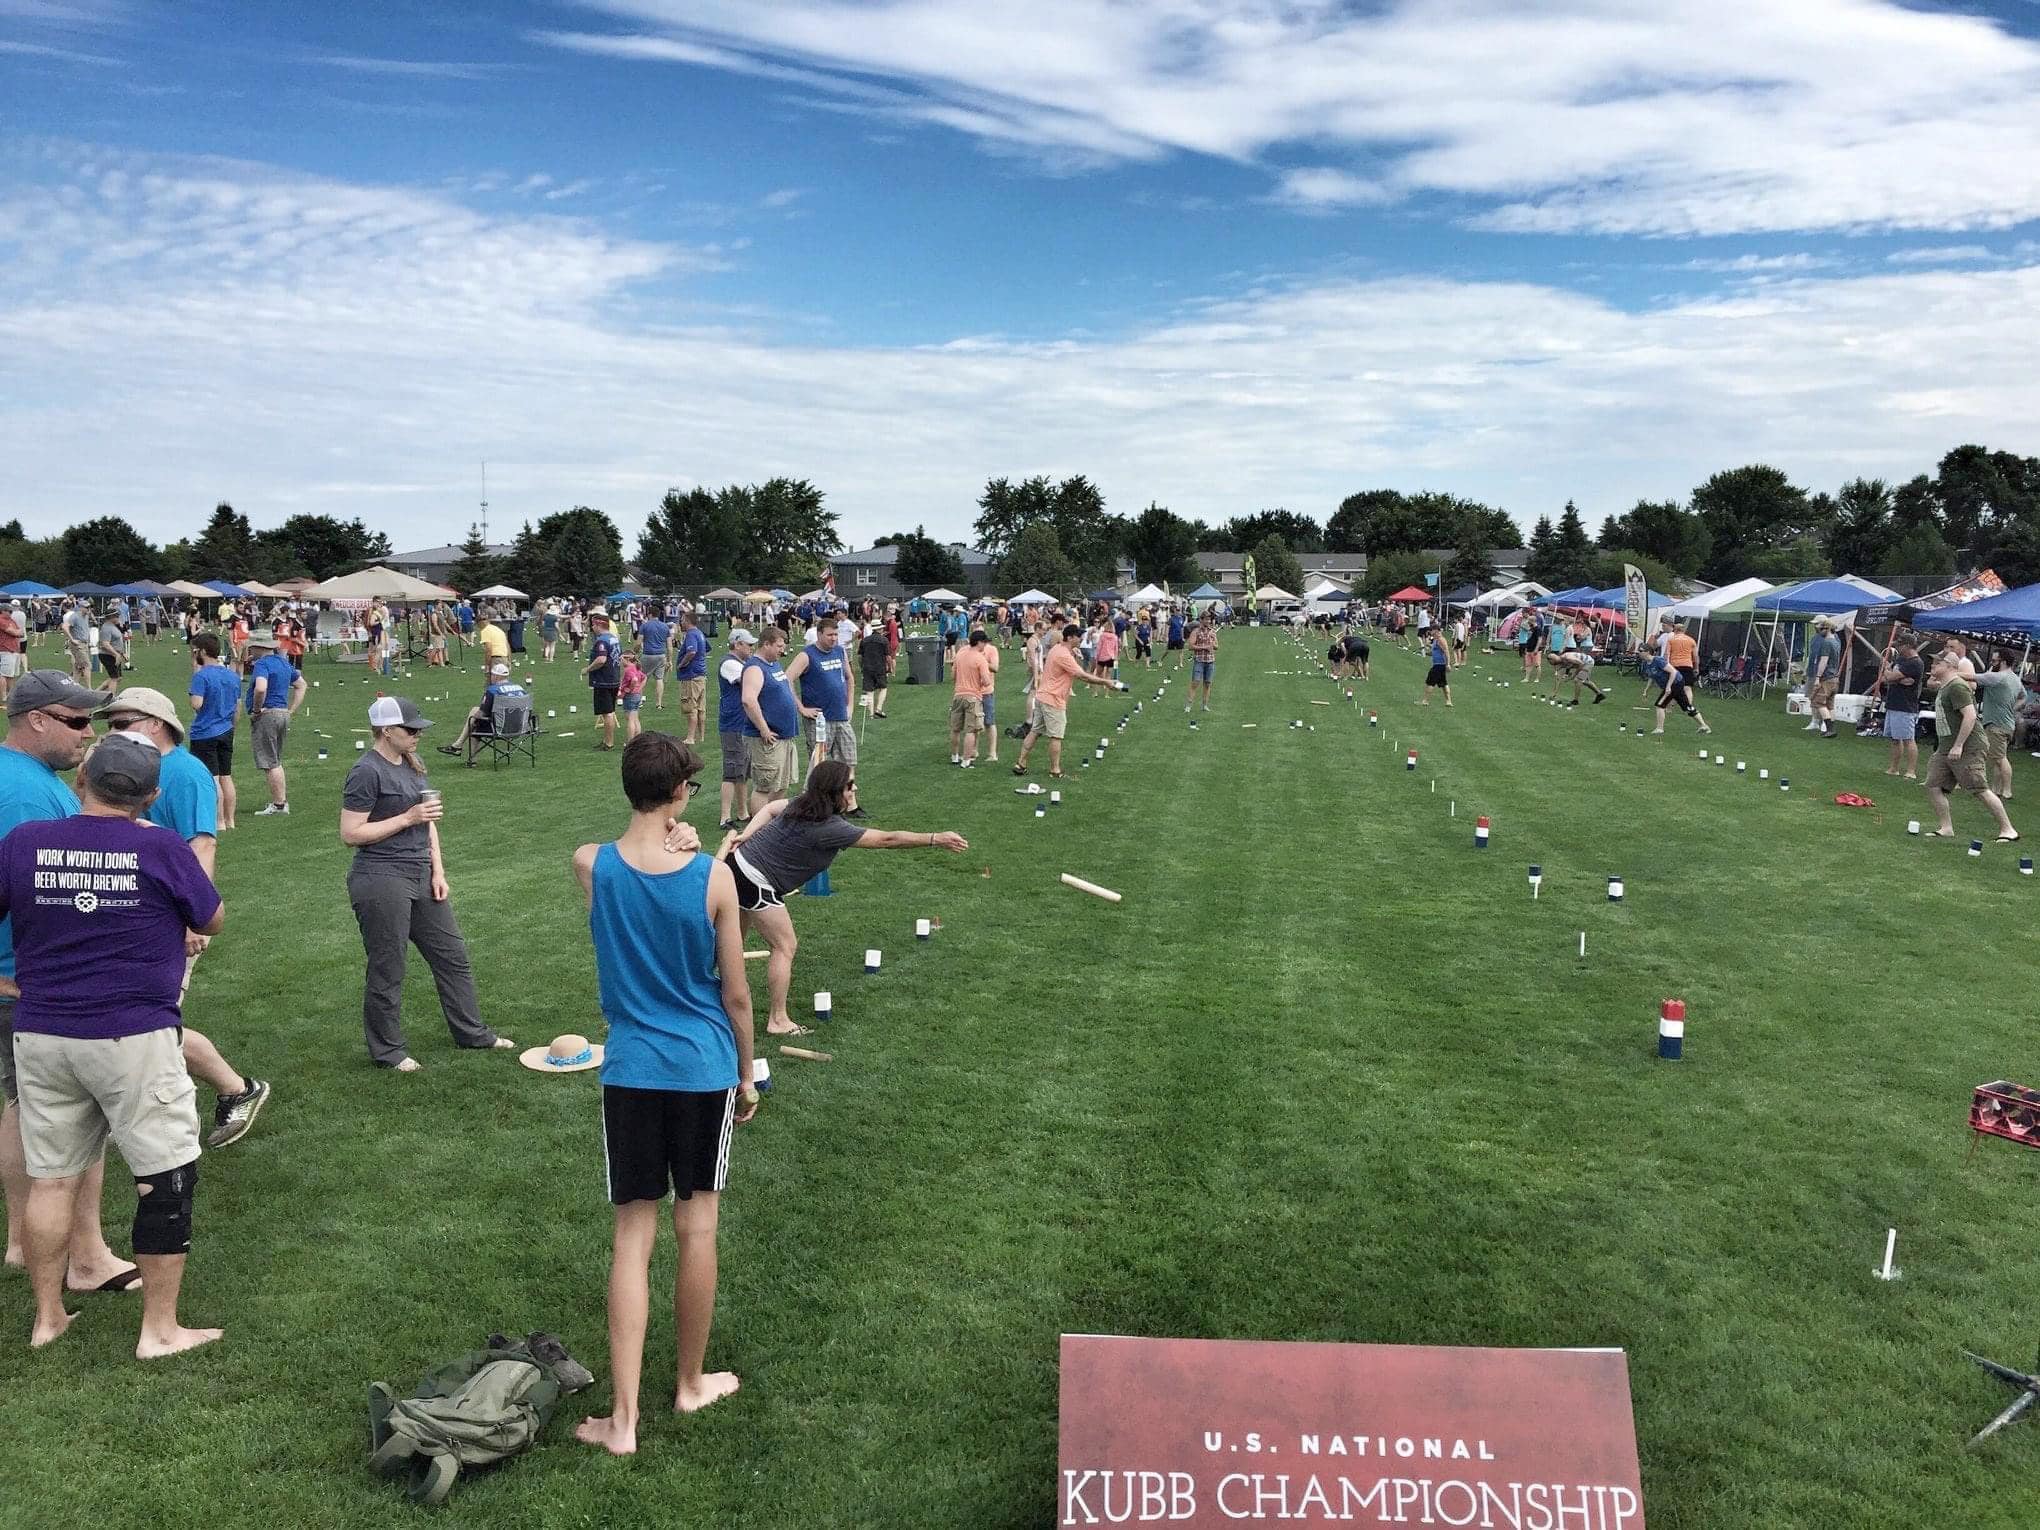 A large group of people is standing on a soccer field with event tents and a sign reading "U.S. National Kubb Championship"